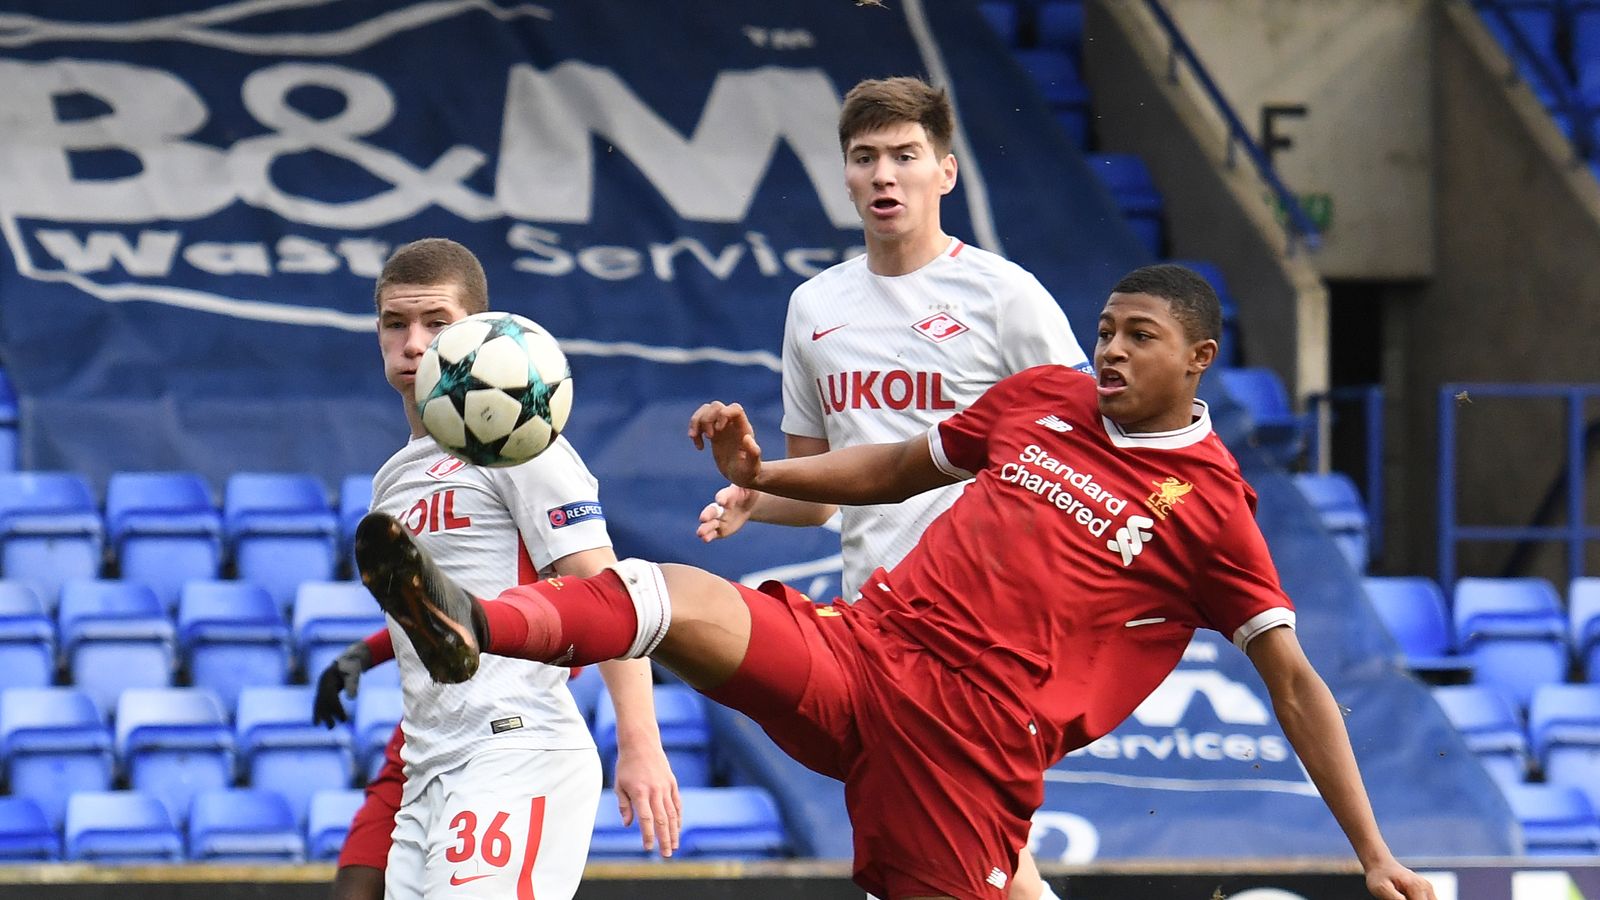 Spartak Moscow U19 live scores, results, fixtures